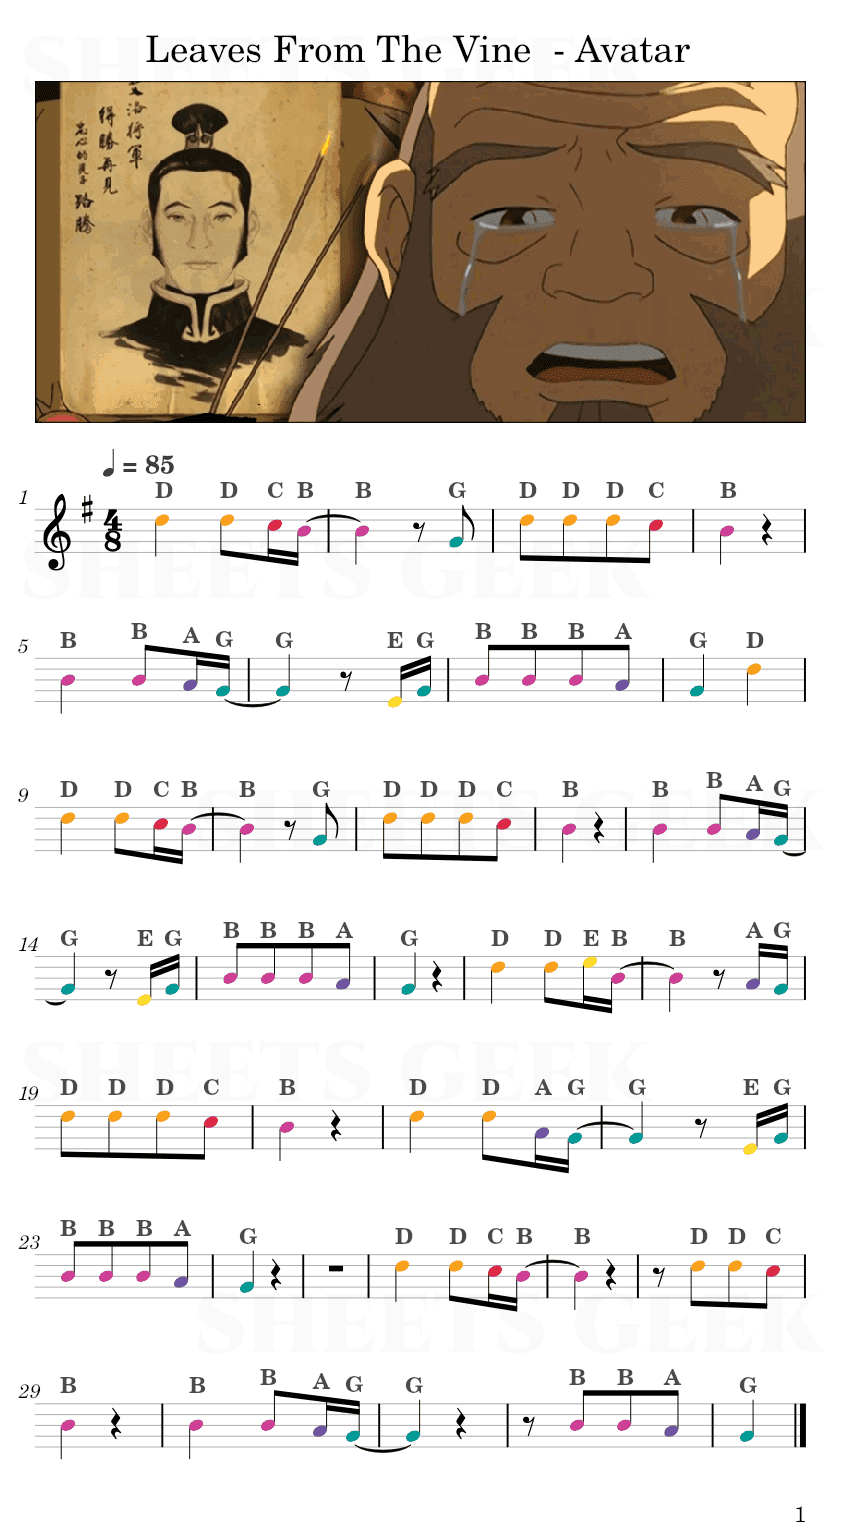 Leaves From The Vine (Little Soldier Boy) - Avatar: The Last Airbender Easy Sheet Music Free for piano, keyboard, flute, violin, sax, cello page 1